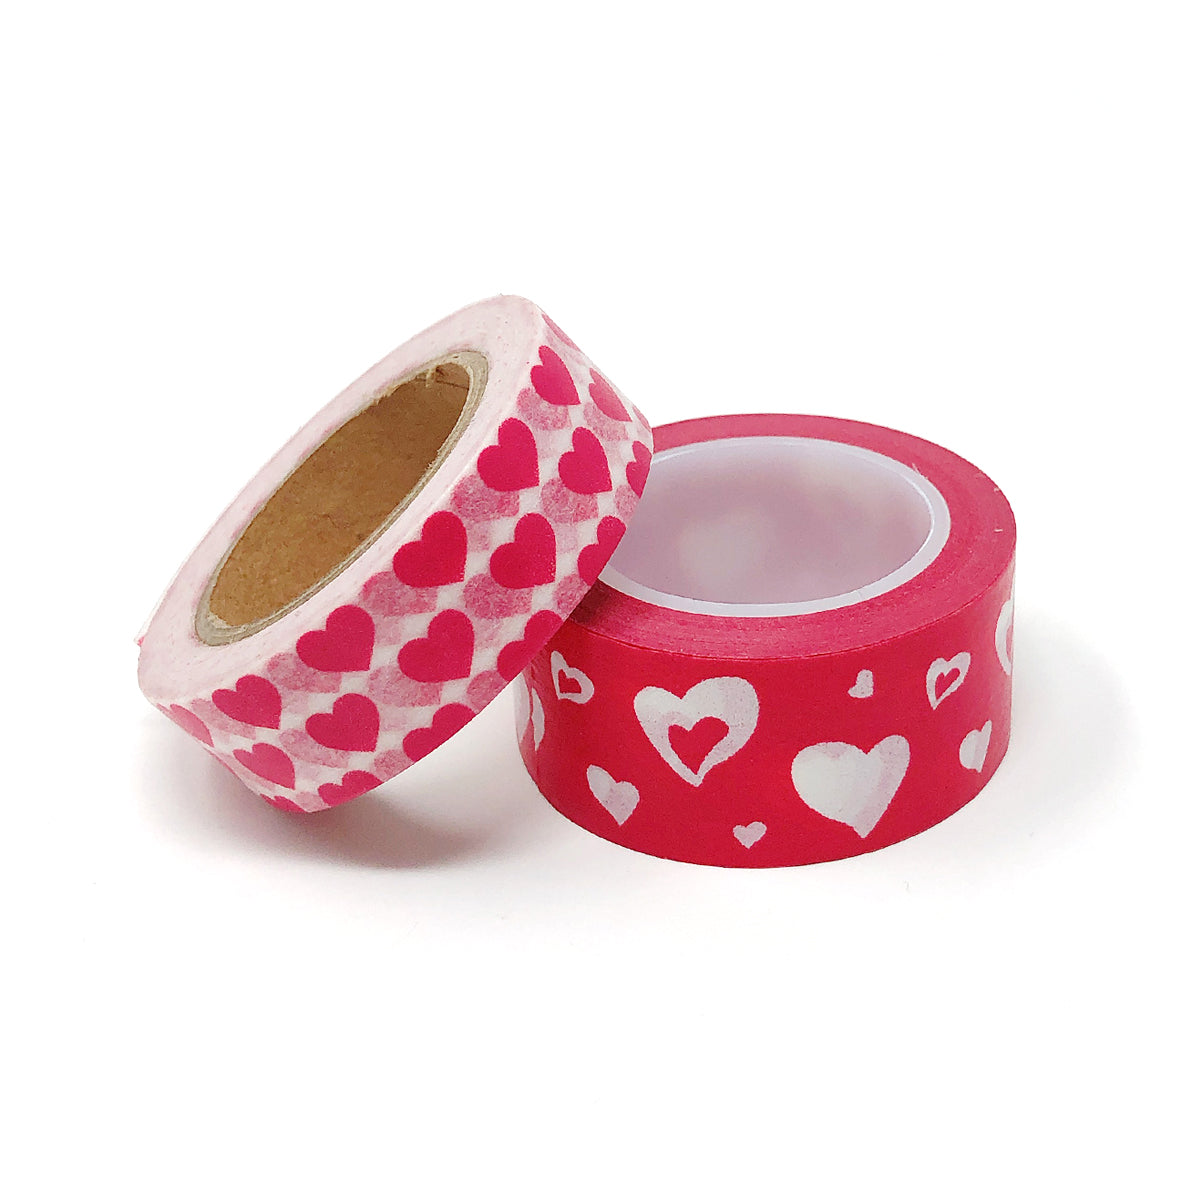 STOBOK 10 Rolls Valentine's Washi Tape Red Masking Tape Craft Tape  Valentine Washi Tape Bridal Shower Party Decorations Cassette Tape Glue  Tape Gift